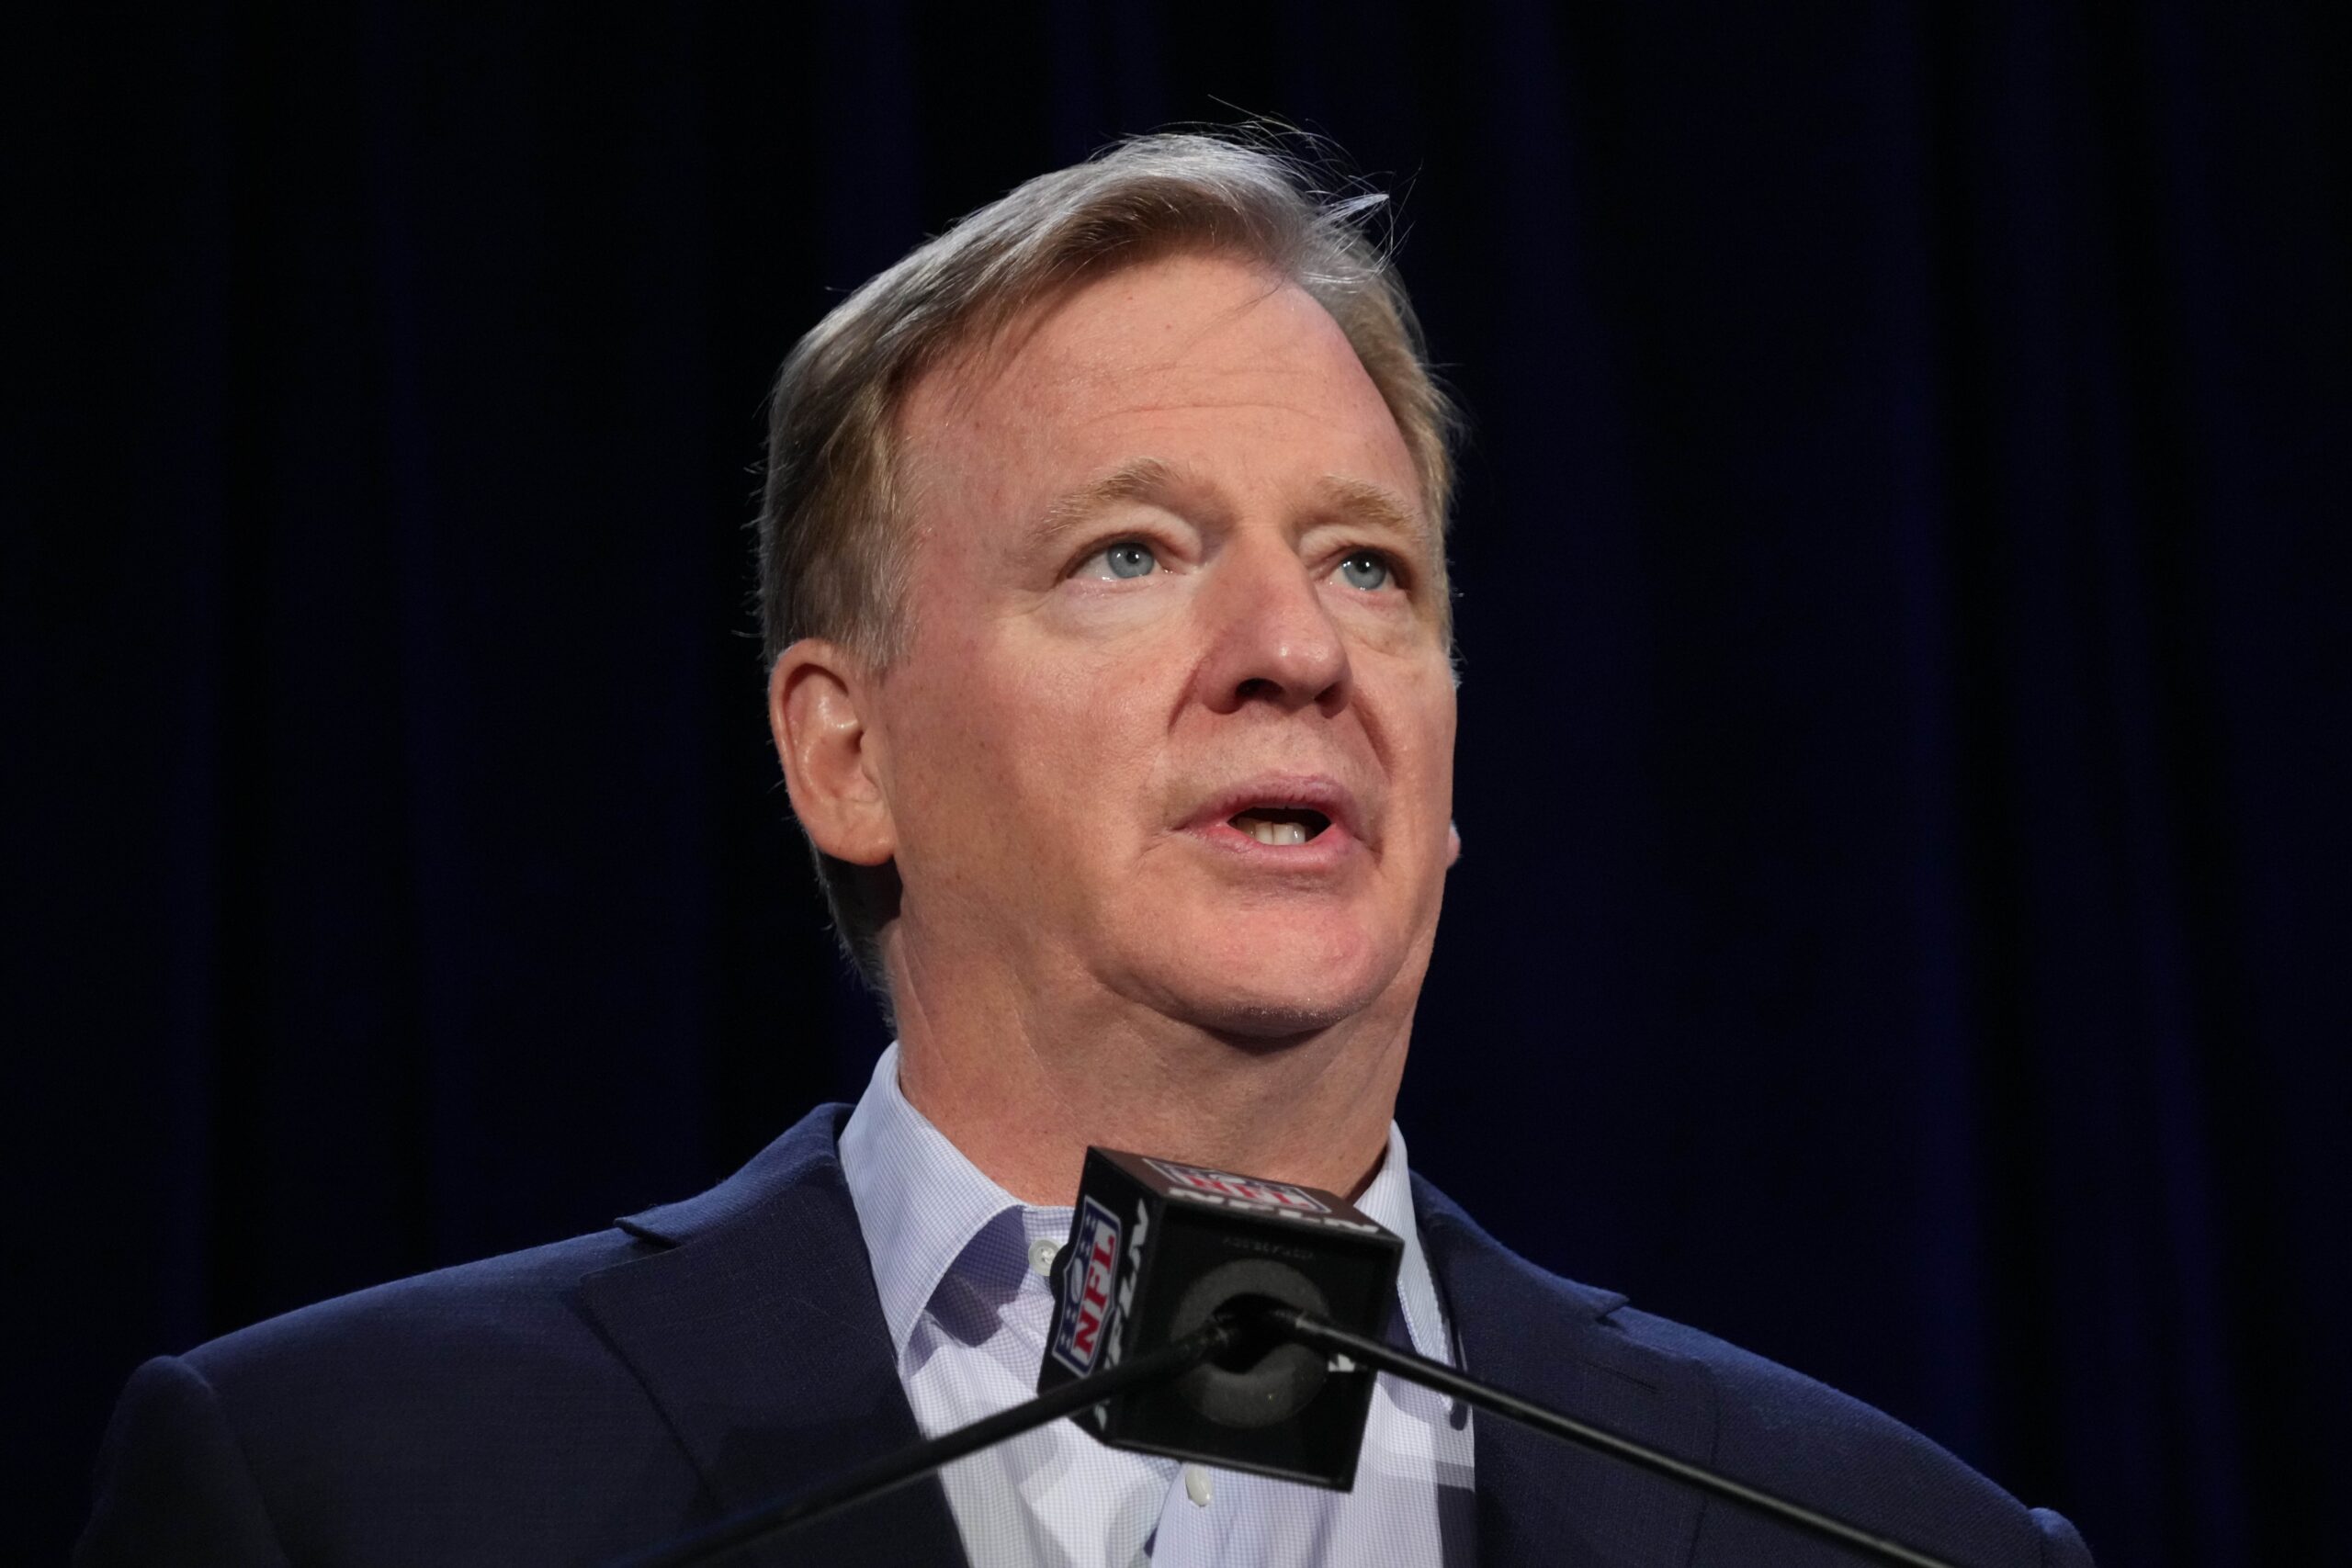 Should We Actually Appreciate Roger Goodell as the NFL Commissioner? | Trey Wingo